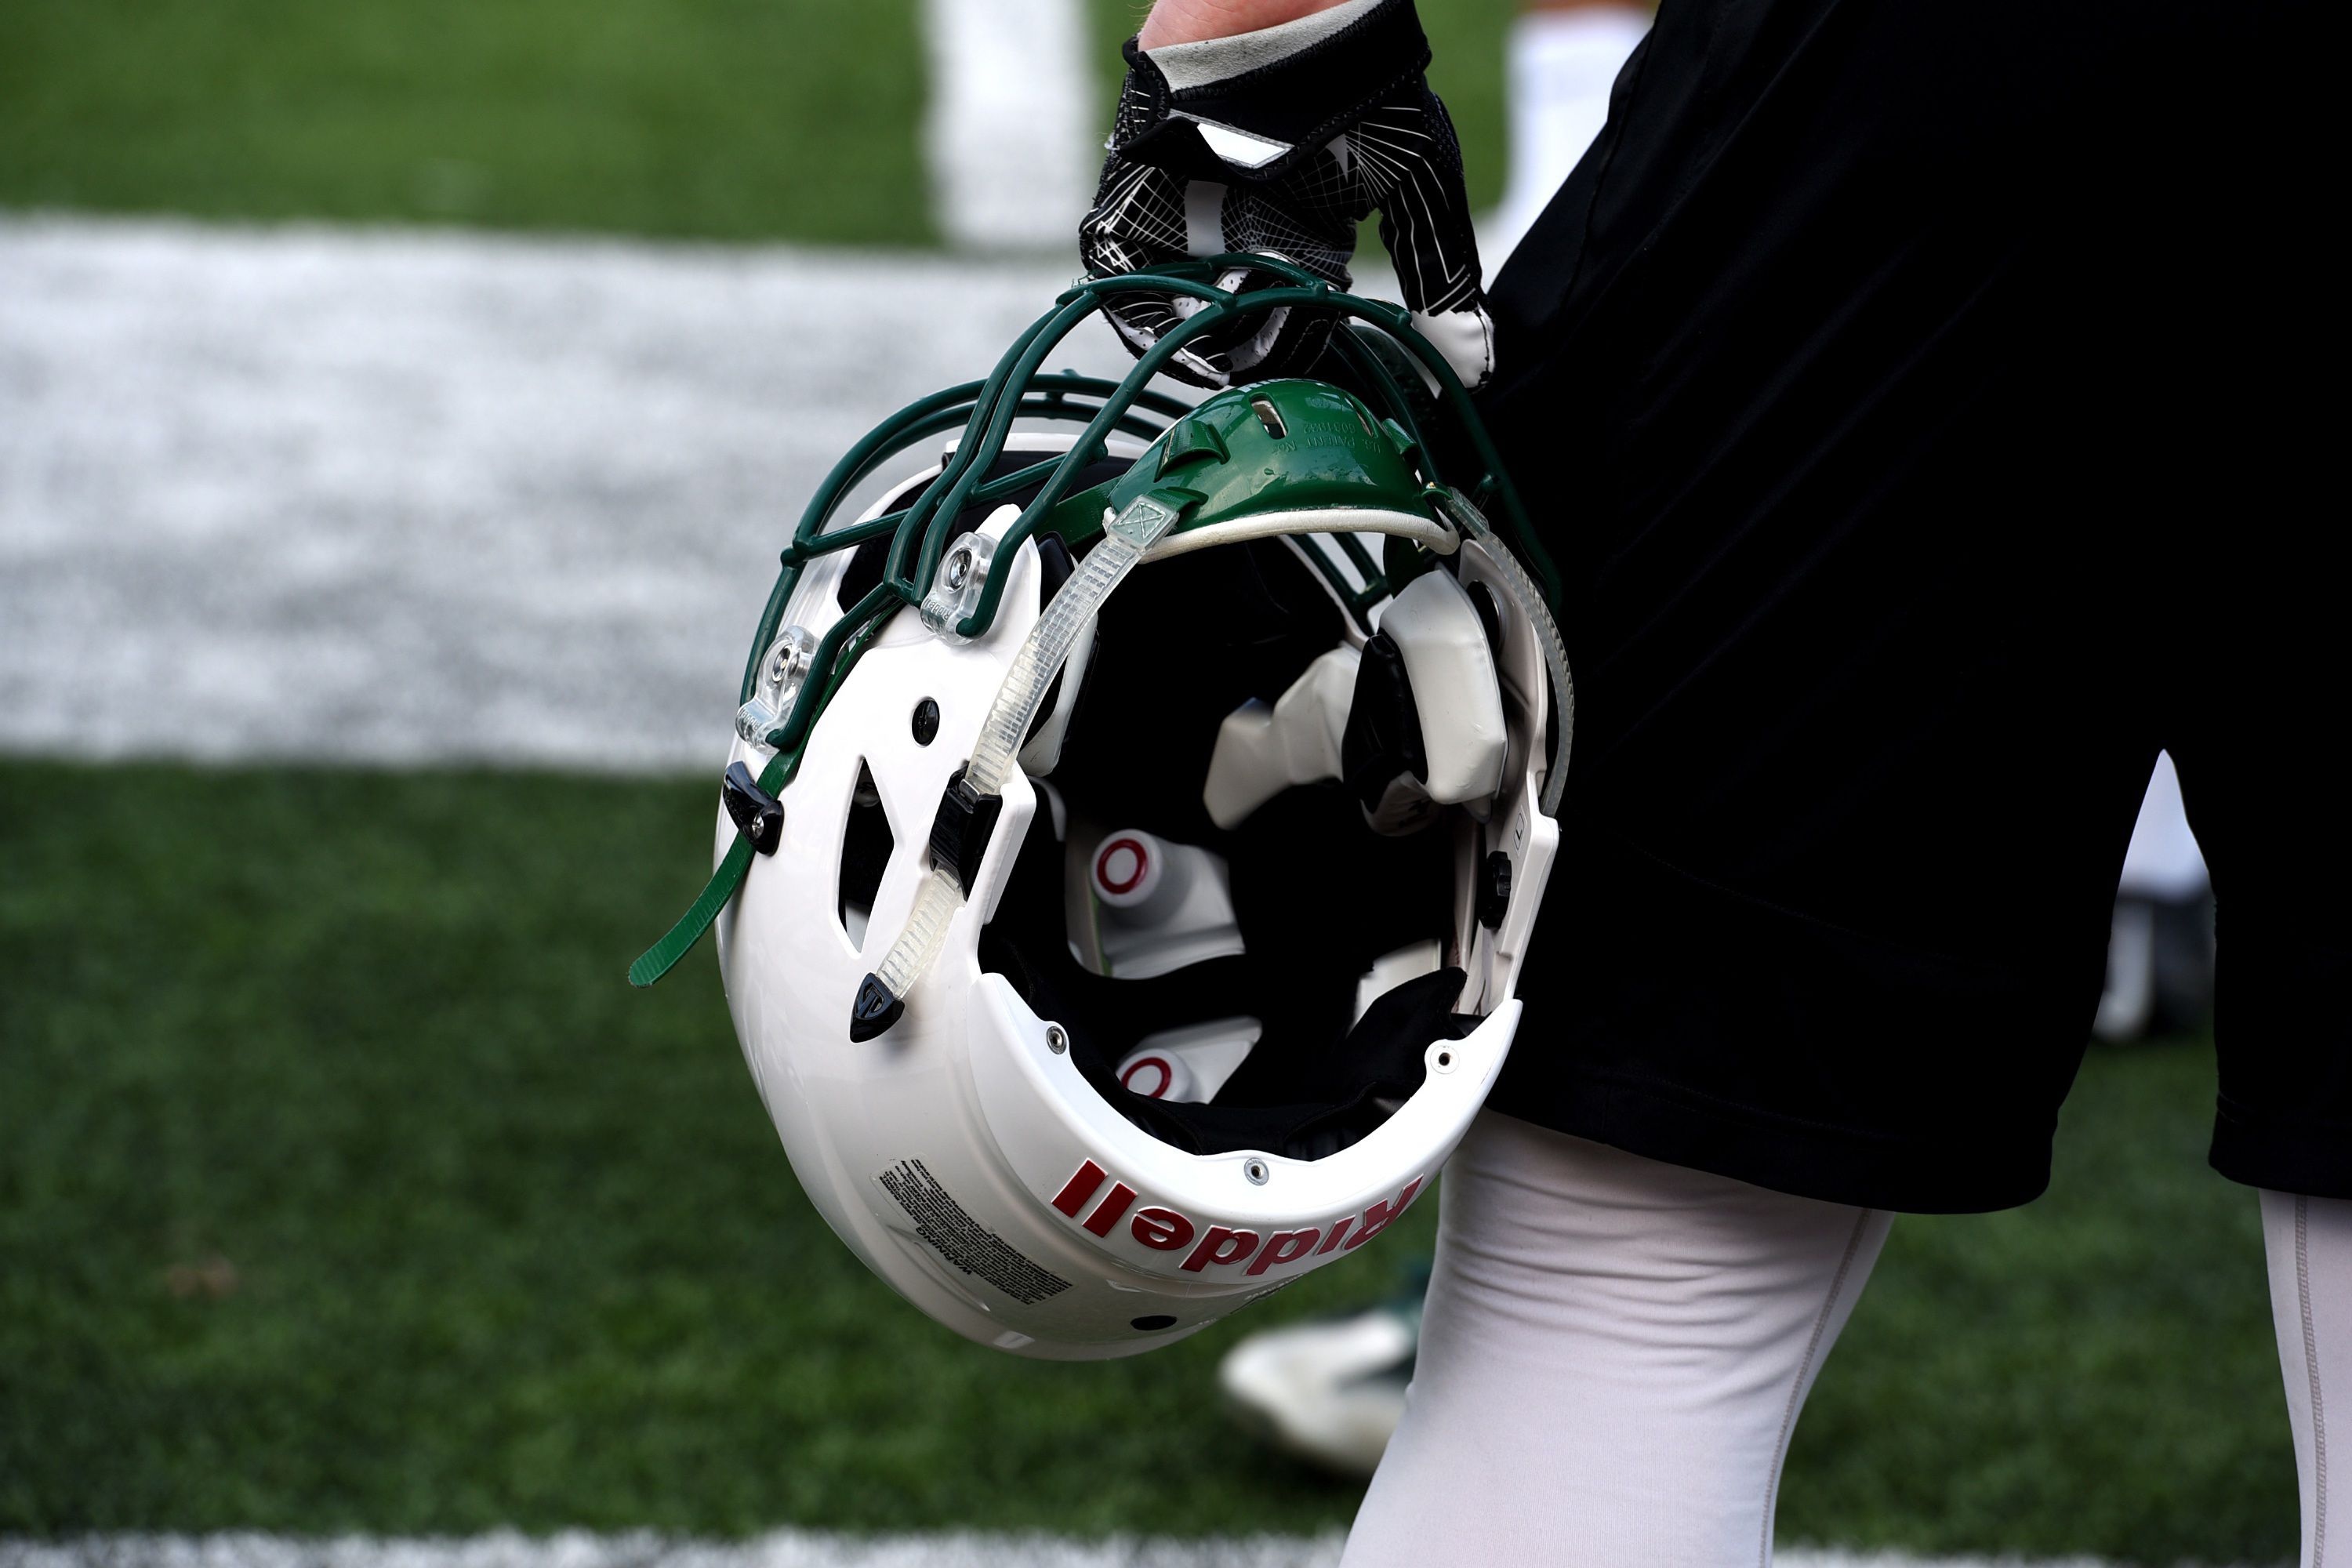 A Dartmouth football player watches from the sideline during a practice in Hanover, N.H, on April 28, 2017. This particular helmet has sensors in it.(Valley News - Jennifer Hauck) Copyright Valley News. May not be reprinted or used online without permission. Send requests to permission@vnews.com.